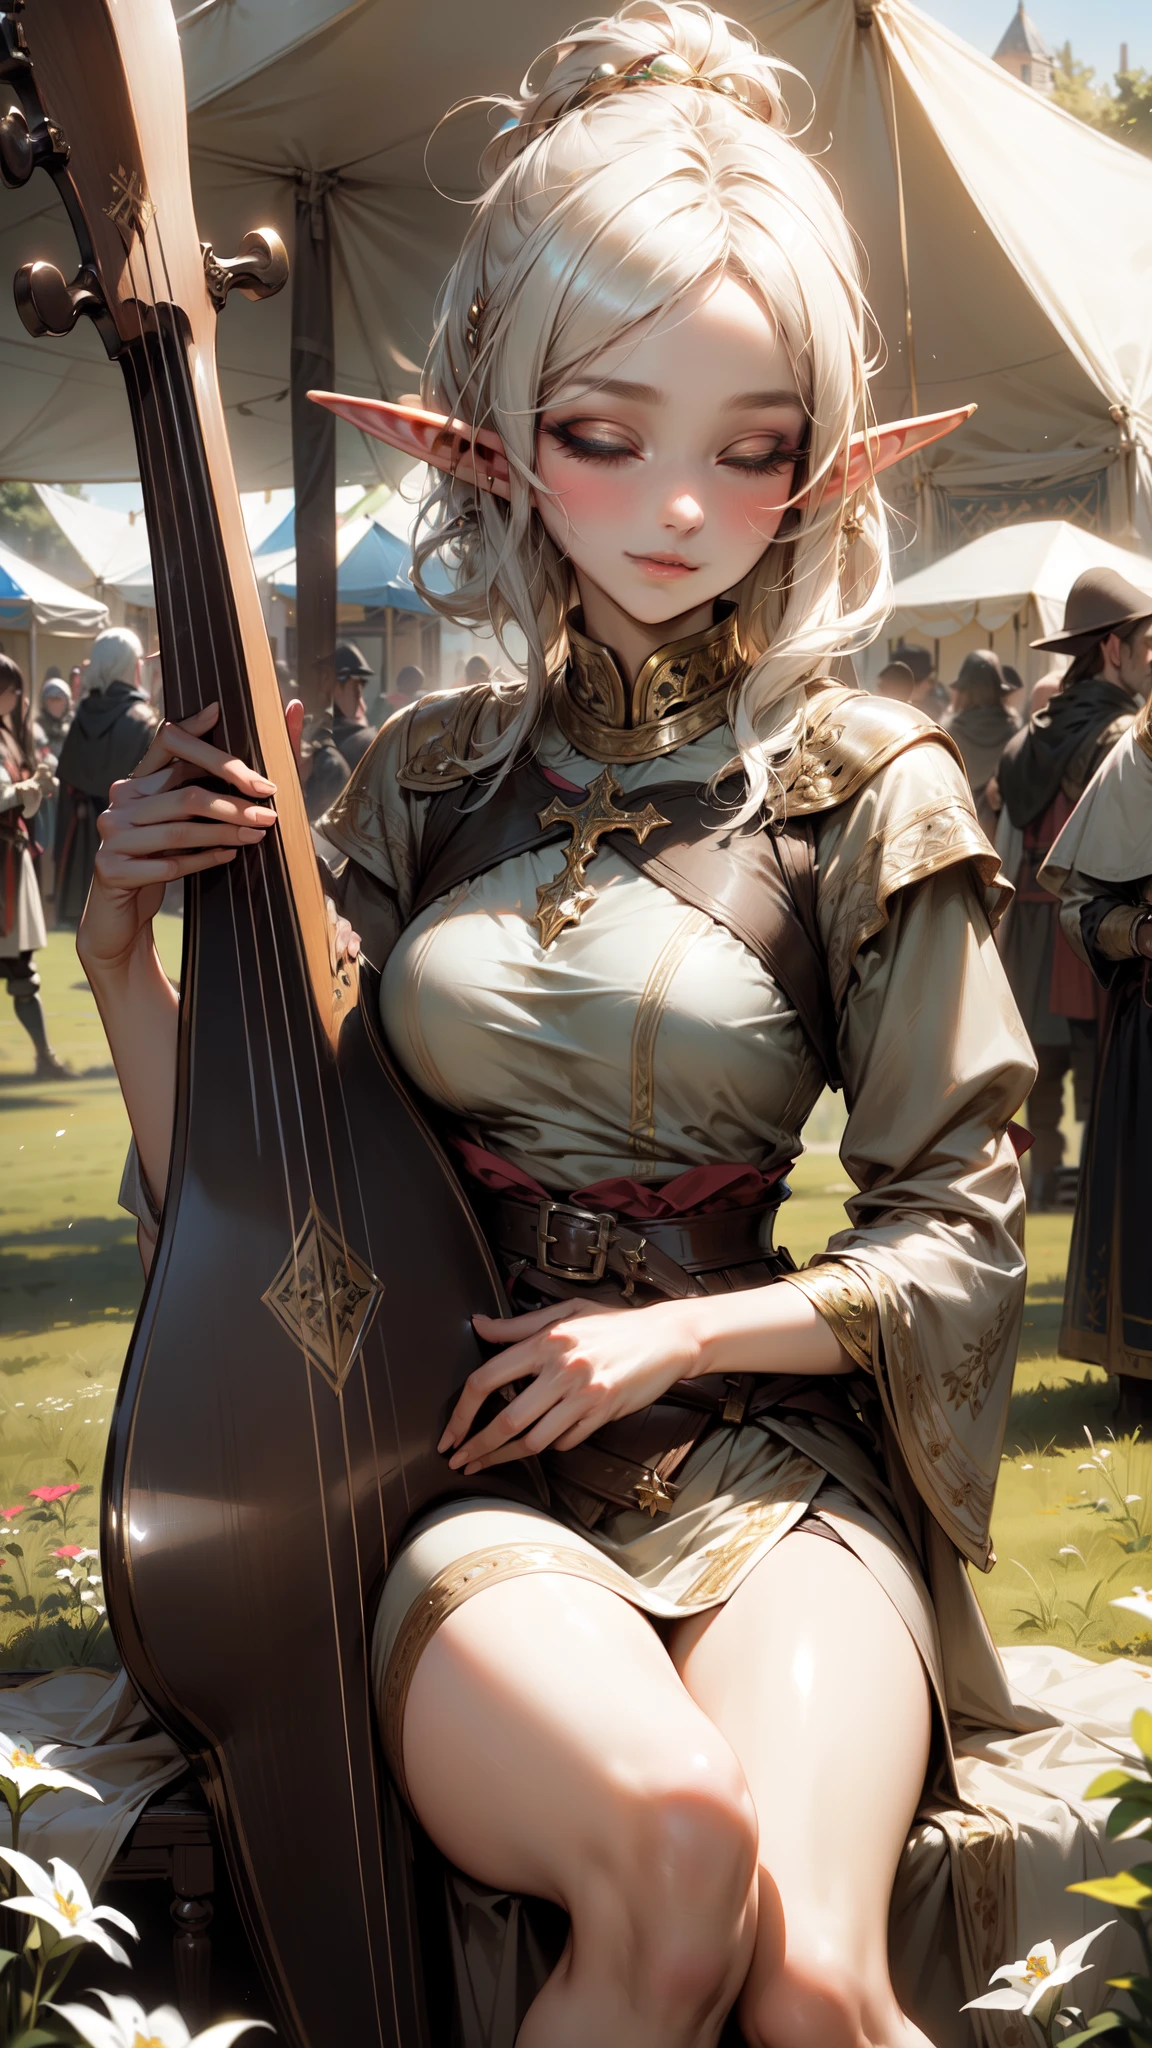 ((masterpiece)), (top quality), (best quality), ((ultra-detailed, 8k quality)), Cinematic lighting, Volumetric lighting, (detailed line art), absurdres, (best composition), (high-resolution), Aesthetics, serene mood, (a graceful gorgeous young elf woman, sitting cross-legged as she plays a lute instrument the crowd),  ((pretty and elegant)), (((playing a lute musical instrument))), ((performing music while sitting outdoors at a (medieval:1.3) spring festival)), ((graceful physique)), medium breasts, (elegant black silk shimmering cocktail dress with gold embroidery), cheerful spring lighting, (outdoors at the crowded village festival), ((people in background field of flowers and tents medieval Europe style)), celebration!, depth of field, sharp focus, (fantasy:1.3), [cinematic dramatic atmosphere],[atmospheric perspective],
BREAK,
highly detailed of ((elf:1.4)), (1girl), solo, perfect face, details eye, hair Bun, (hime cut, bangs:1.2), (white shining hair:1.2),((blindfolded, eyes closed)), (beautiful detailed eyelashes, eyeshadow, pink eyeshadow),  gentle smile, Concept art by Mikimoto Haruhiko, by Kawacy, By Yoshitaka Amano, BREAK, 
((perfect anatomy)), perfect body, (medium breast), perfect hands, perfect face, beautiful face, beautiful eyes, perfect eyes, (perfect fingers, deatailed fingers), correct anatomy, perfect legs, 